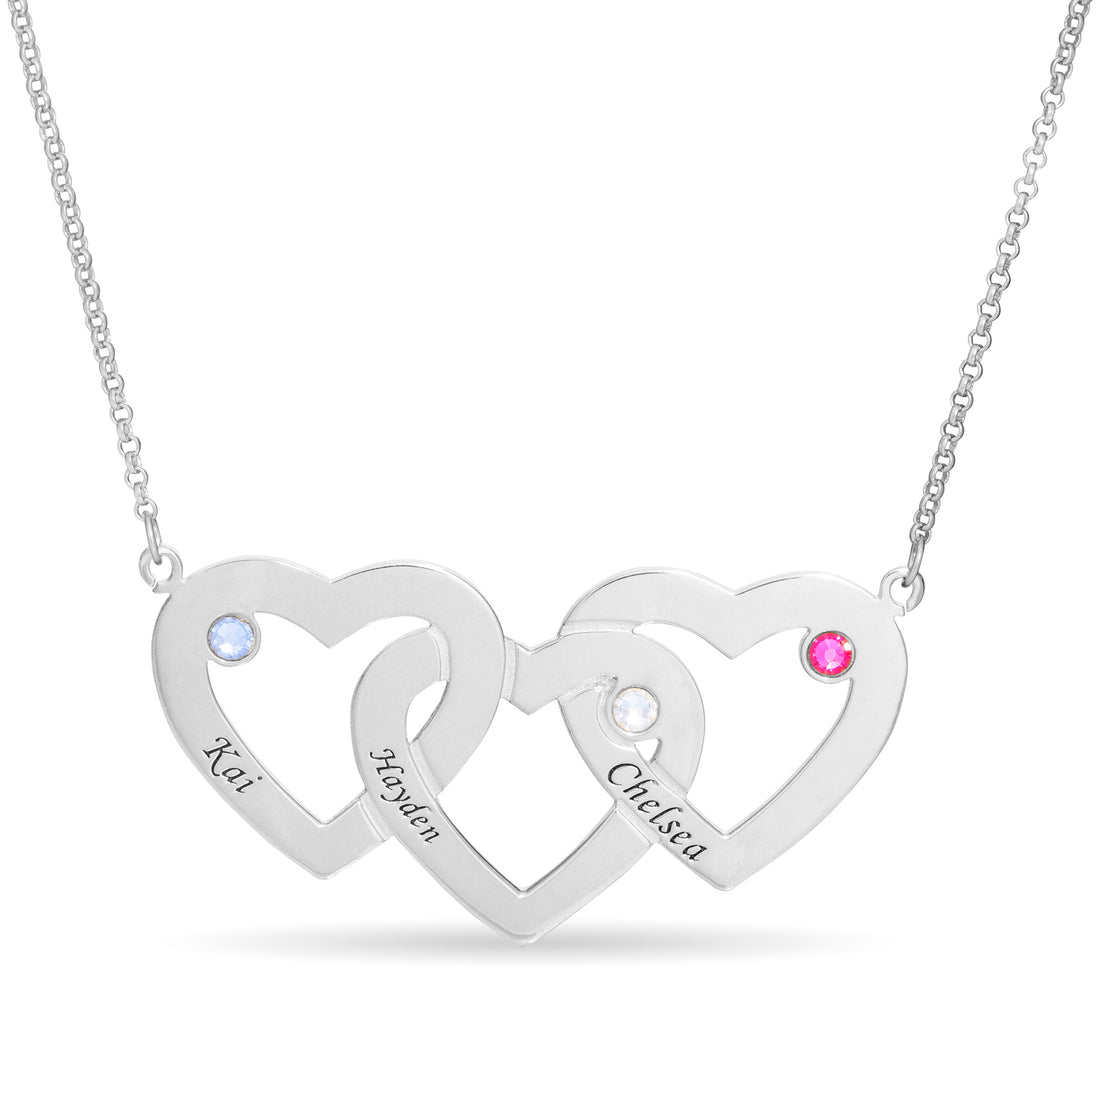 Three Heart Name Necklace